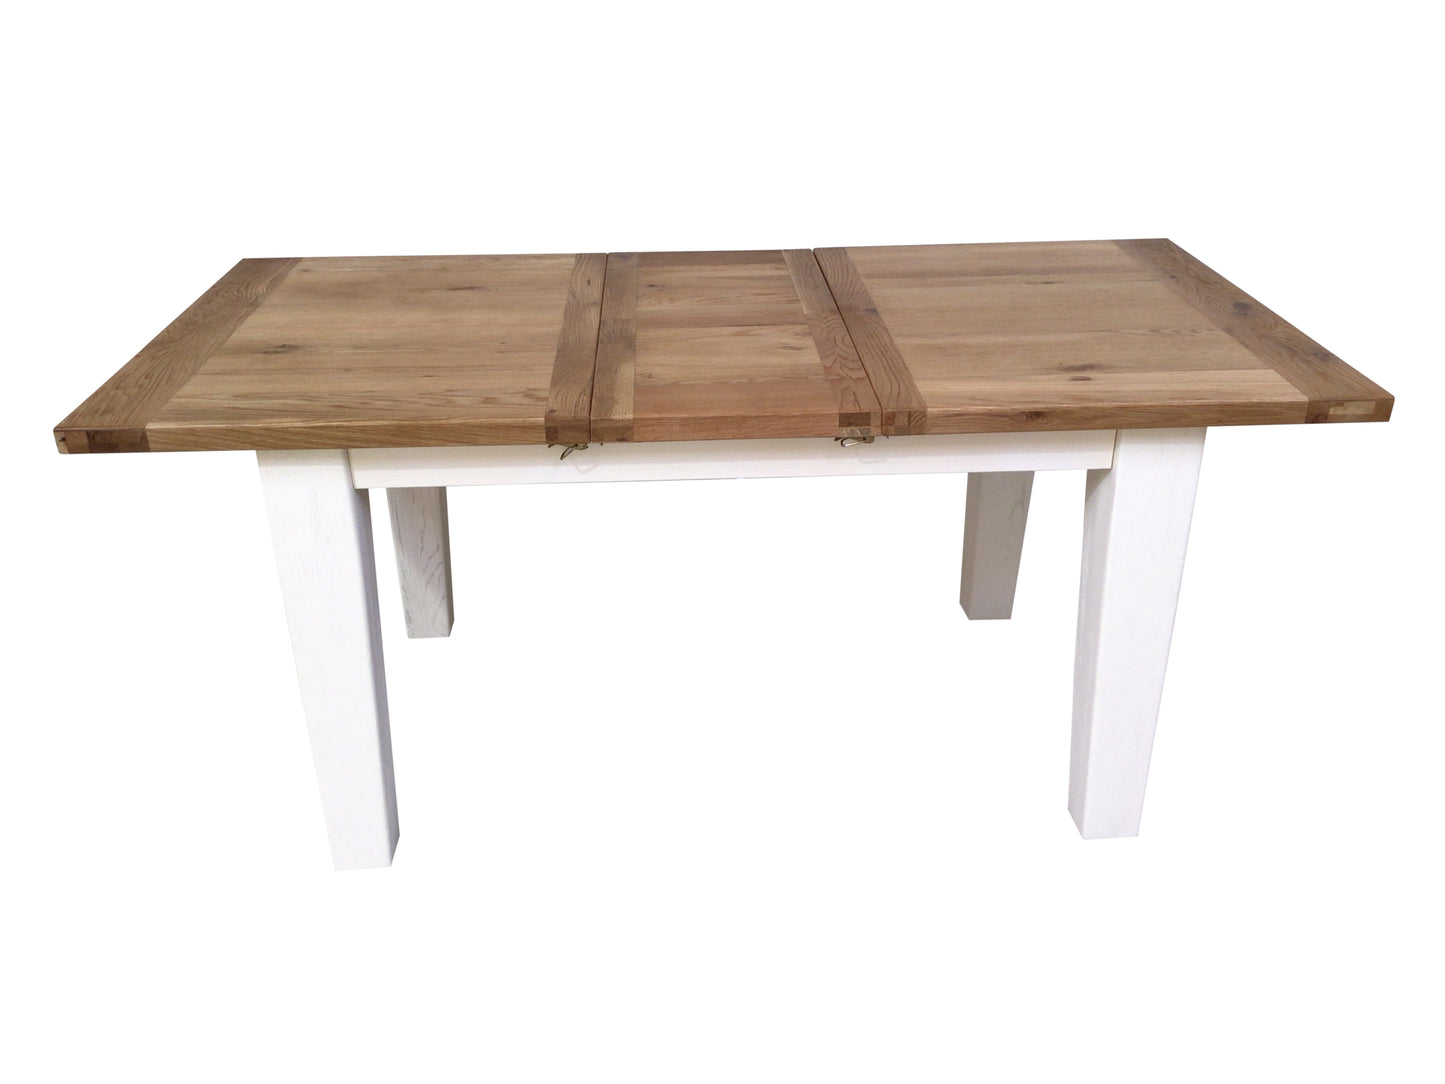 Calgary Oak 1.4m Ext Dining Table painted off-white